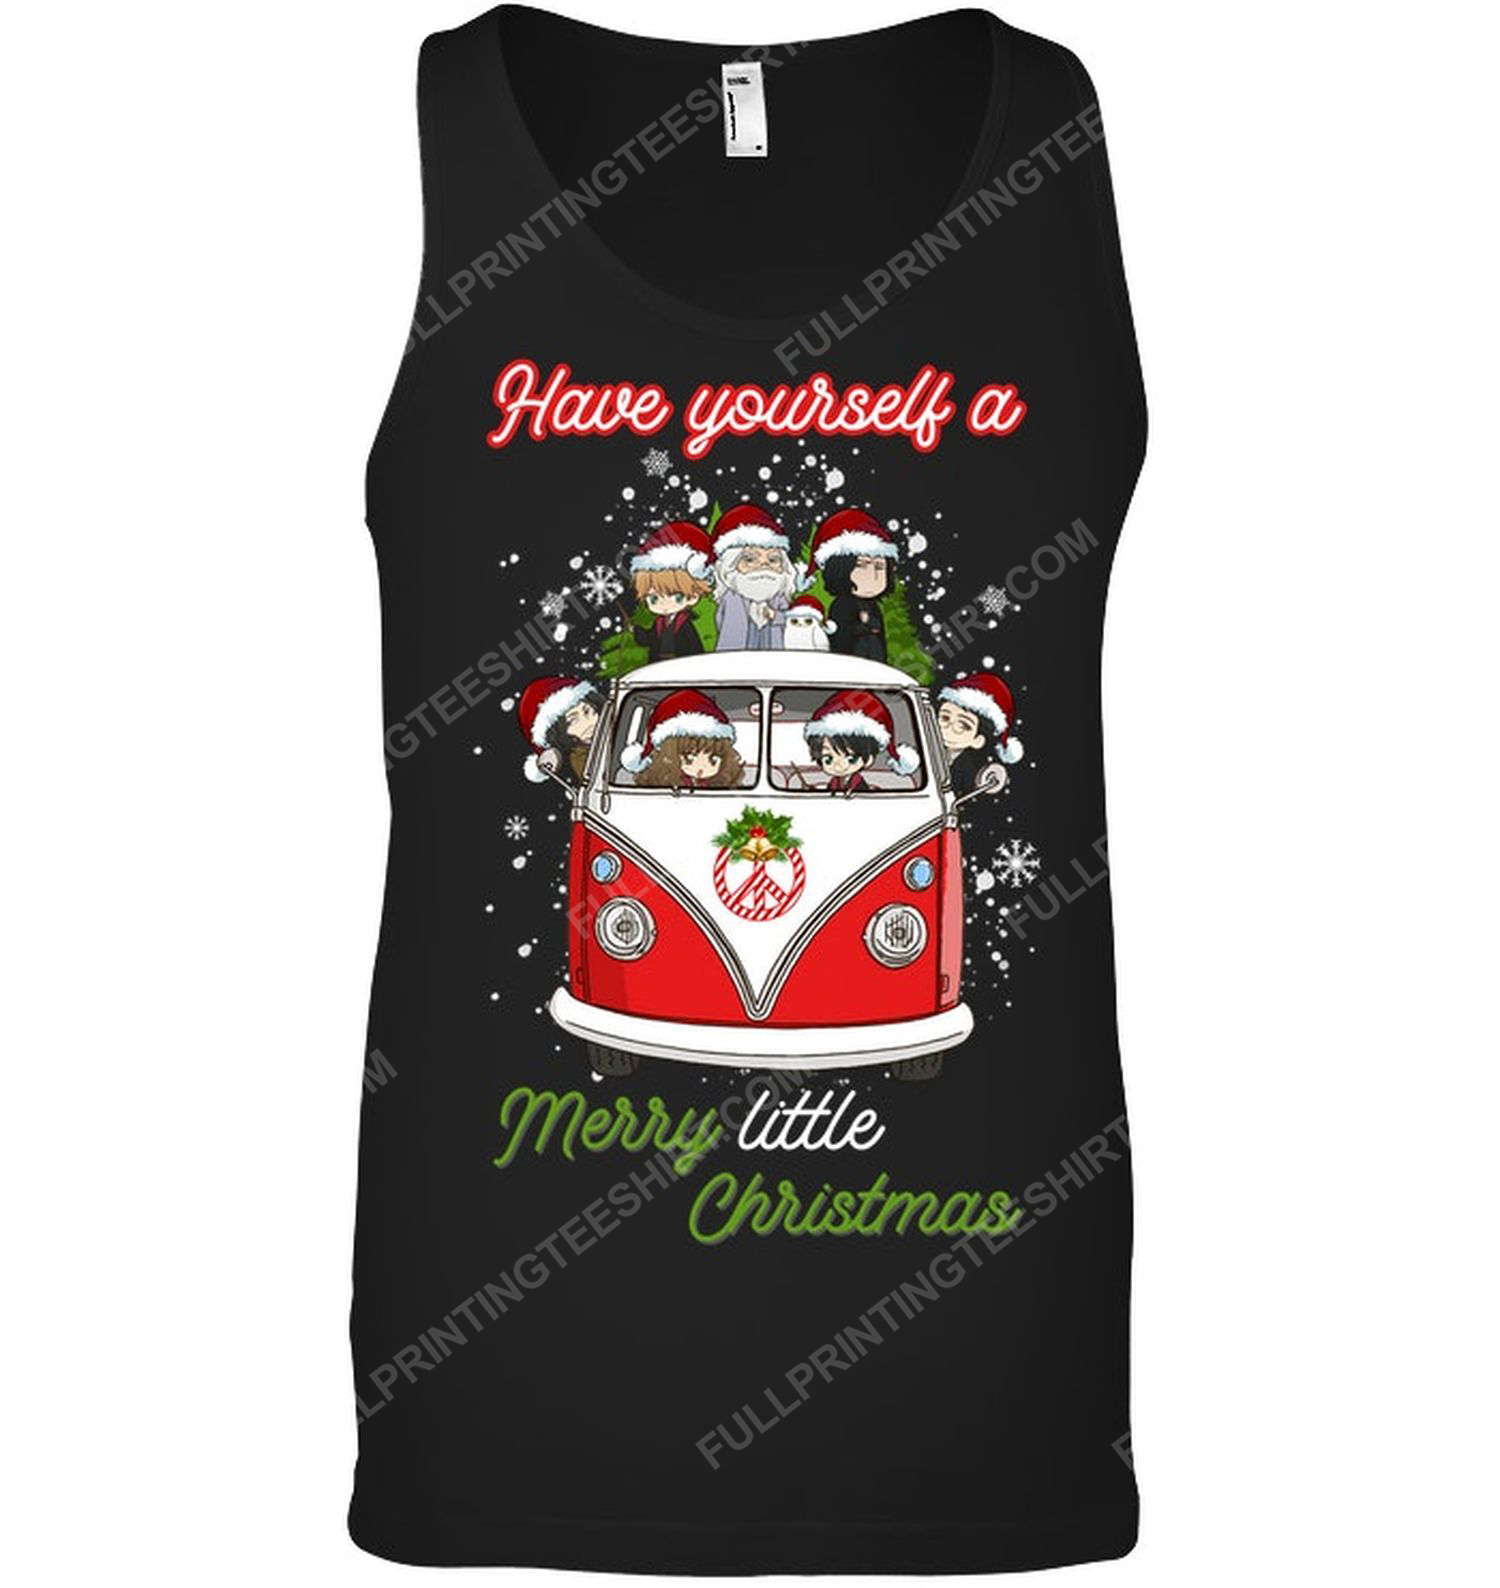 Harry potter characters have yourself a merry little christmas tank top